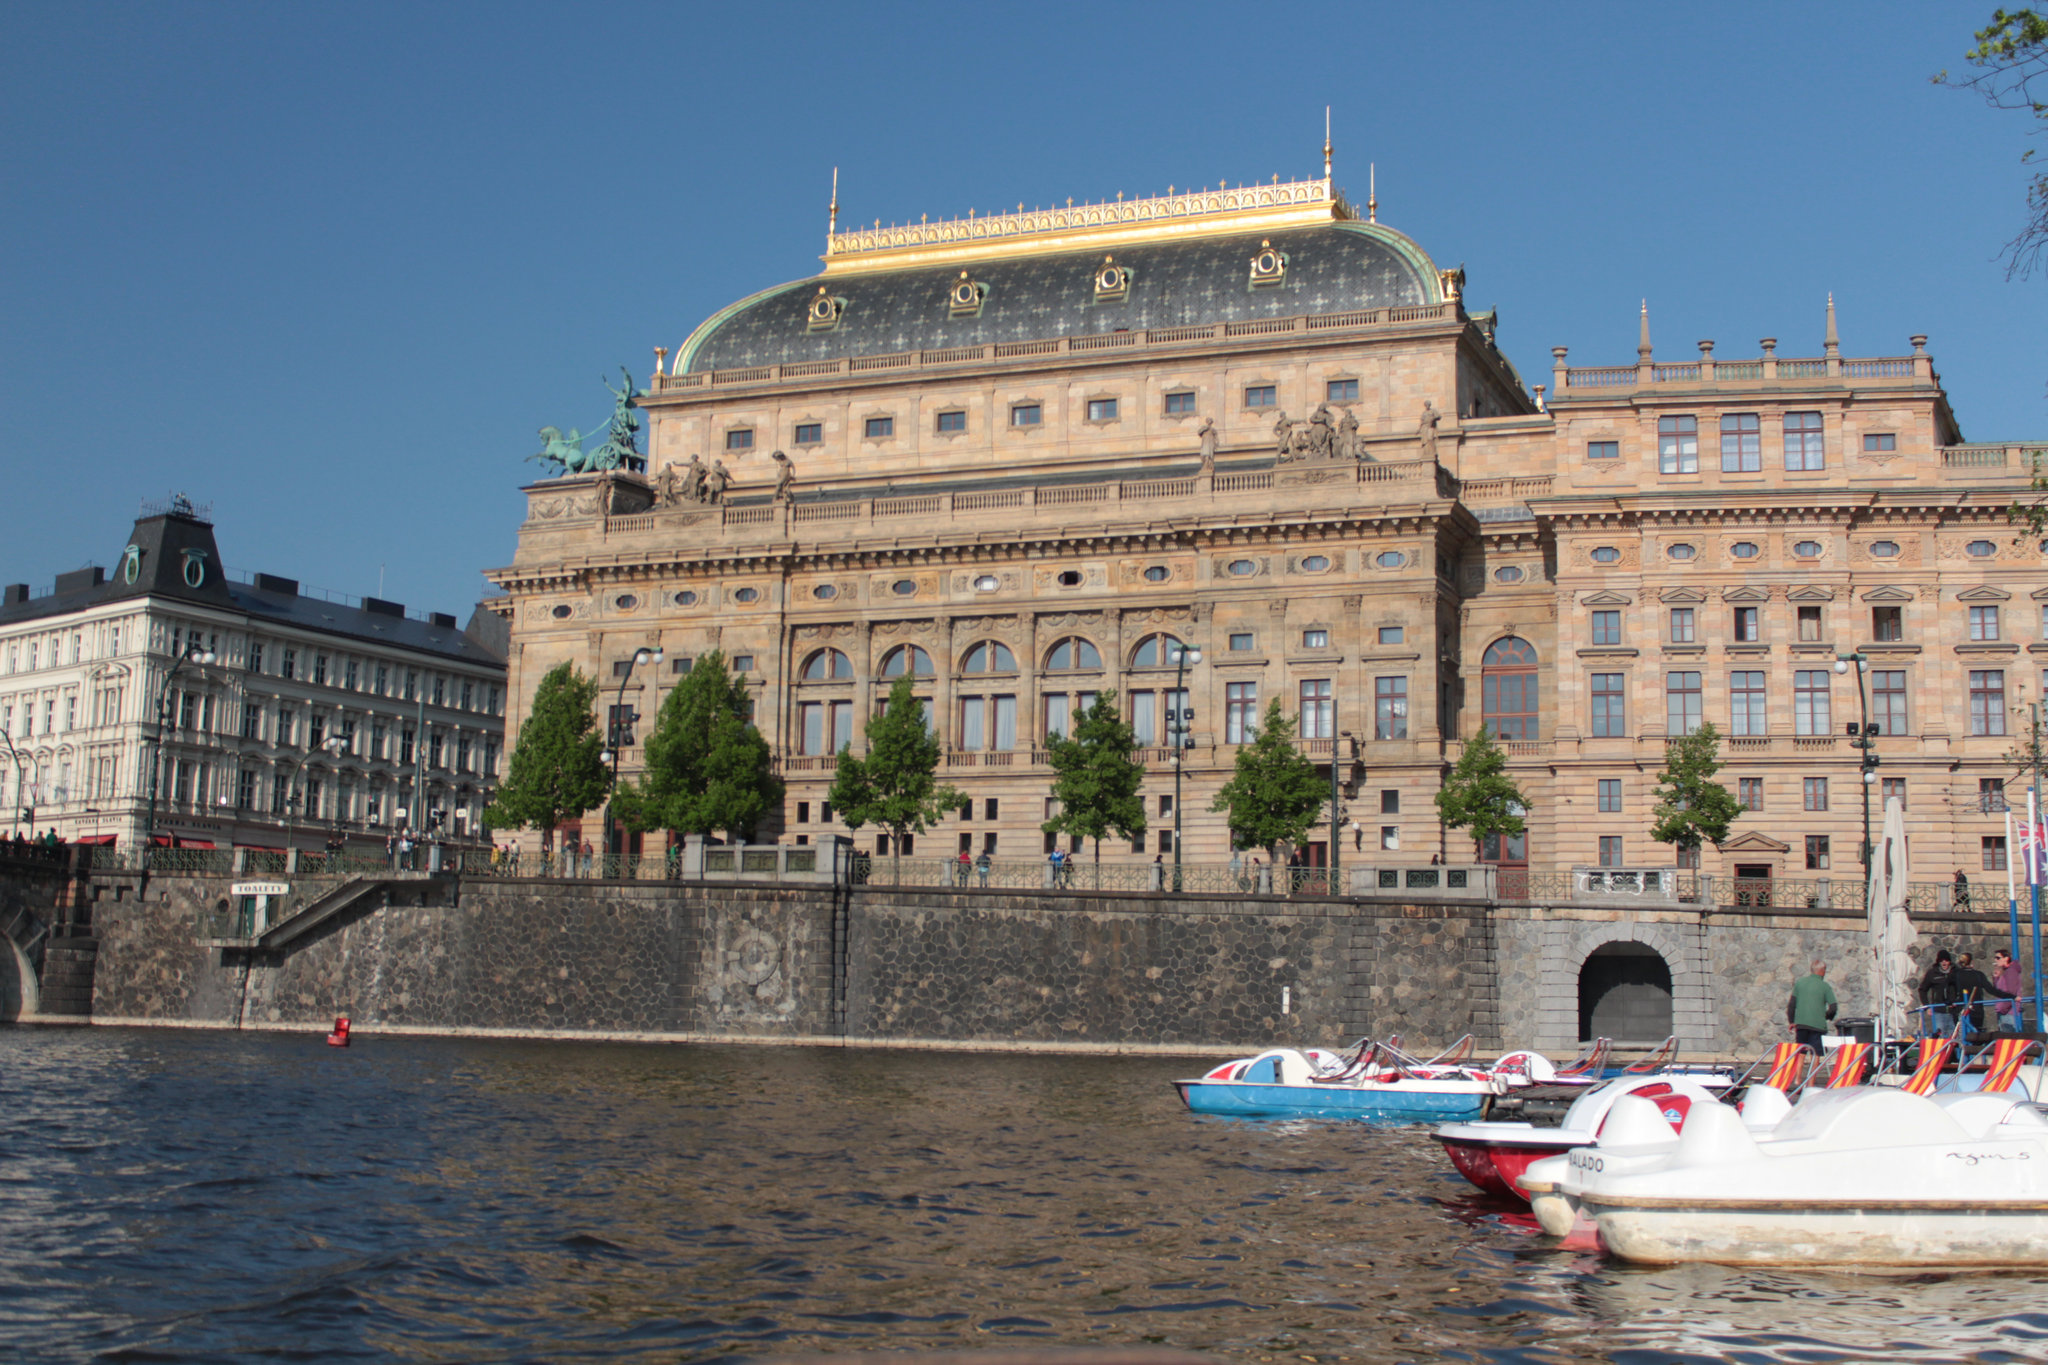 Building of National Theatre in Prague